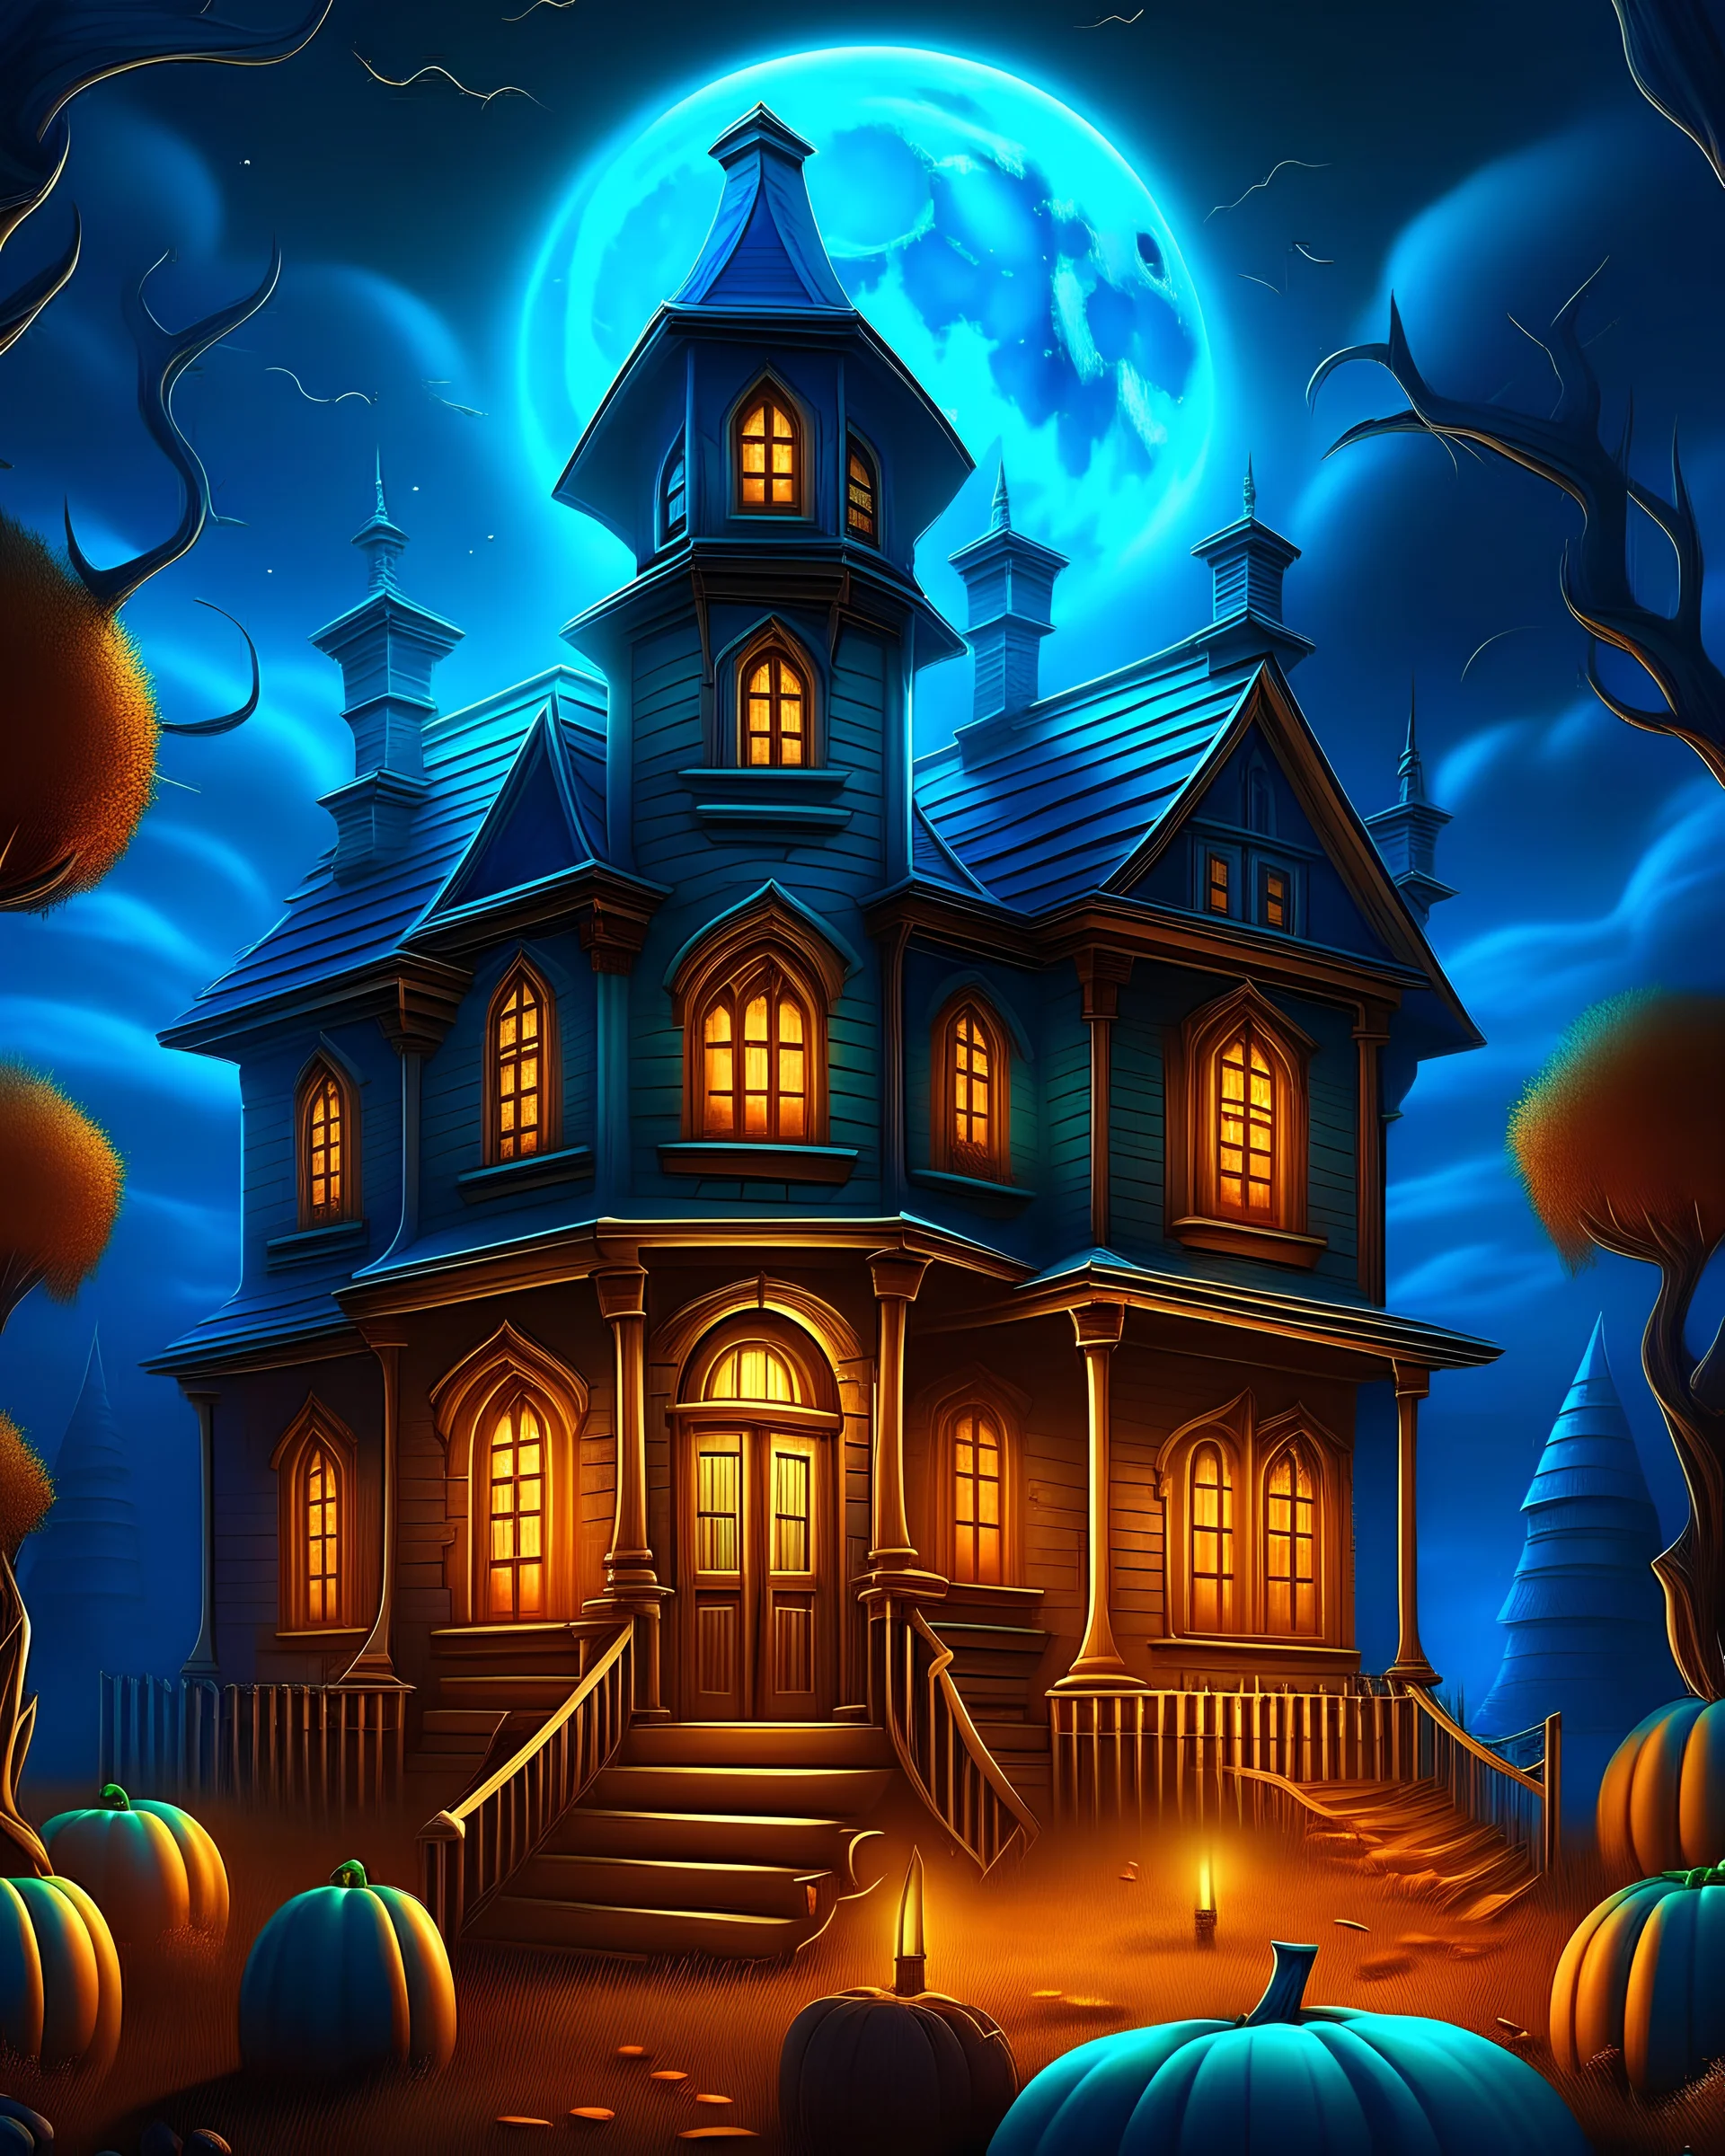 Generate a high-resolution, photo-realistic image of a vibrant blue haunted house with eerie architectural details, set in a spooky Halloween scene. In the foreground, place two pumpkins stacked, the top one carved and glowing. A haunted skeleton should be emerging from near the pumpkins. Include a witch flying on a broom across the large, glowing blue moon, casting shadows over the scene. Several bats should also be flying in the sky. The overall composition should be vivid and capture the chil